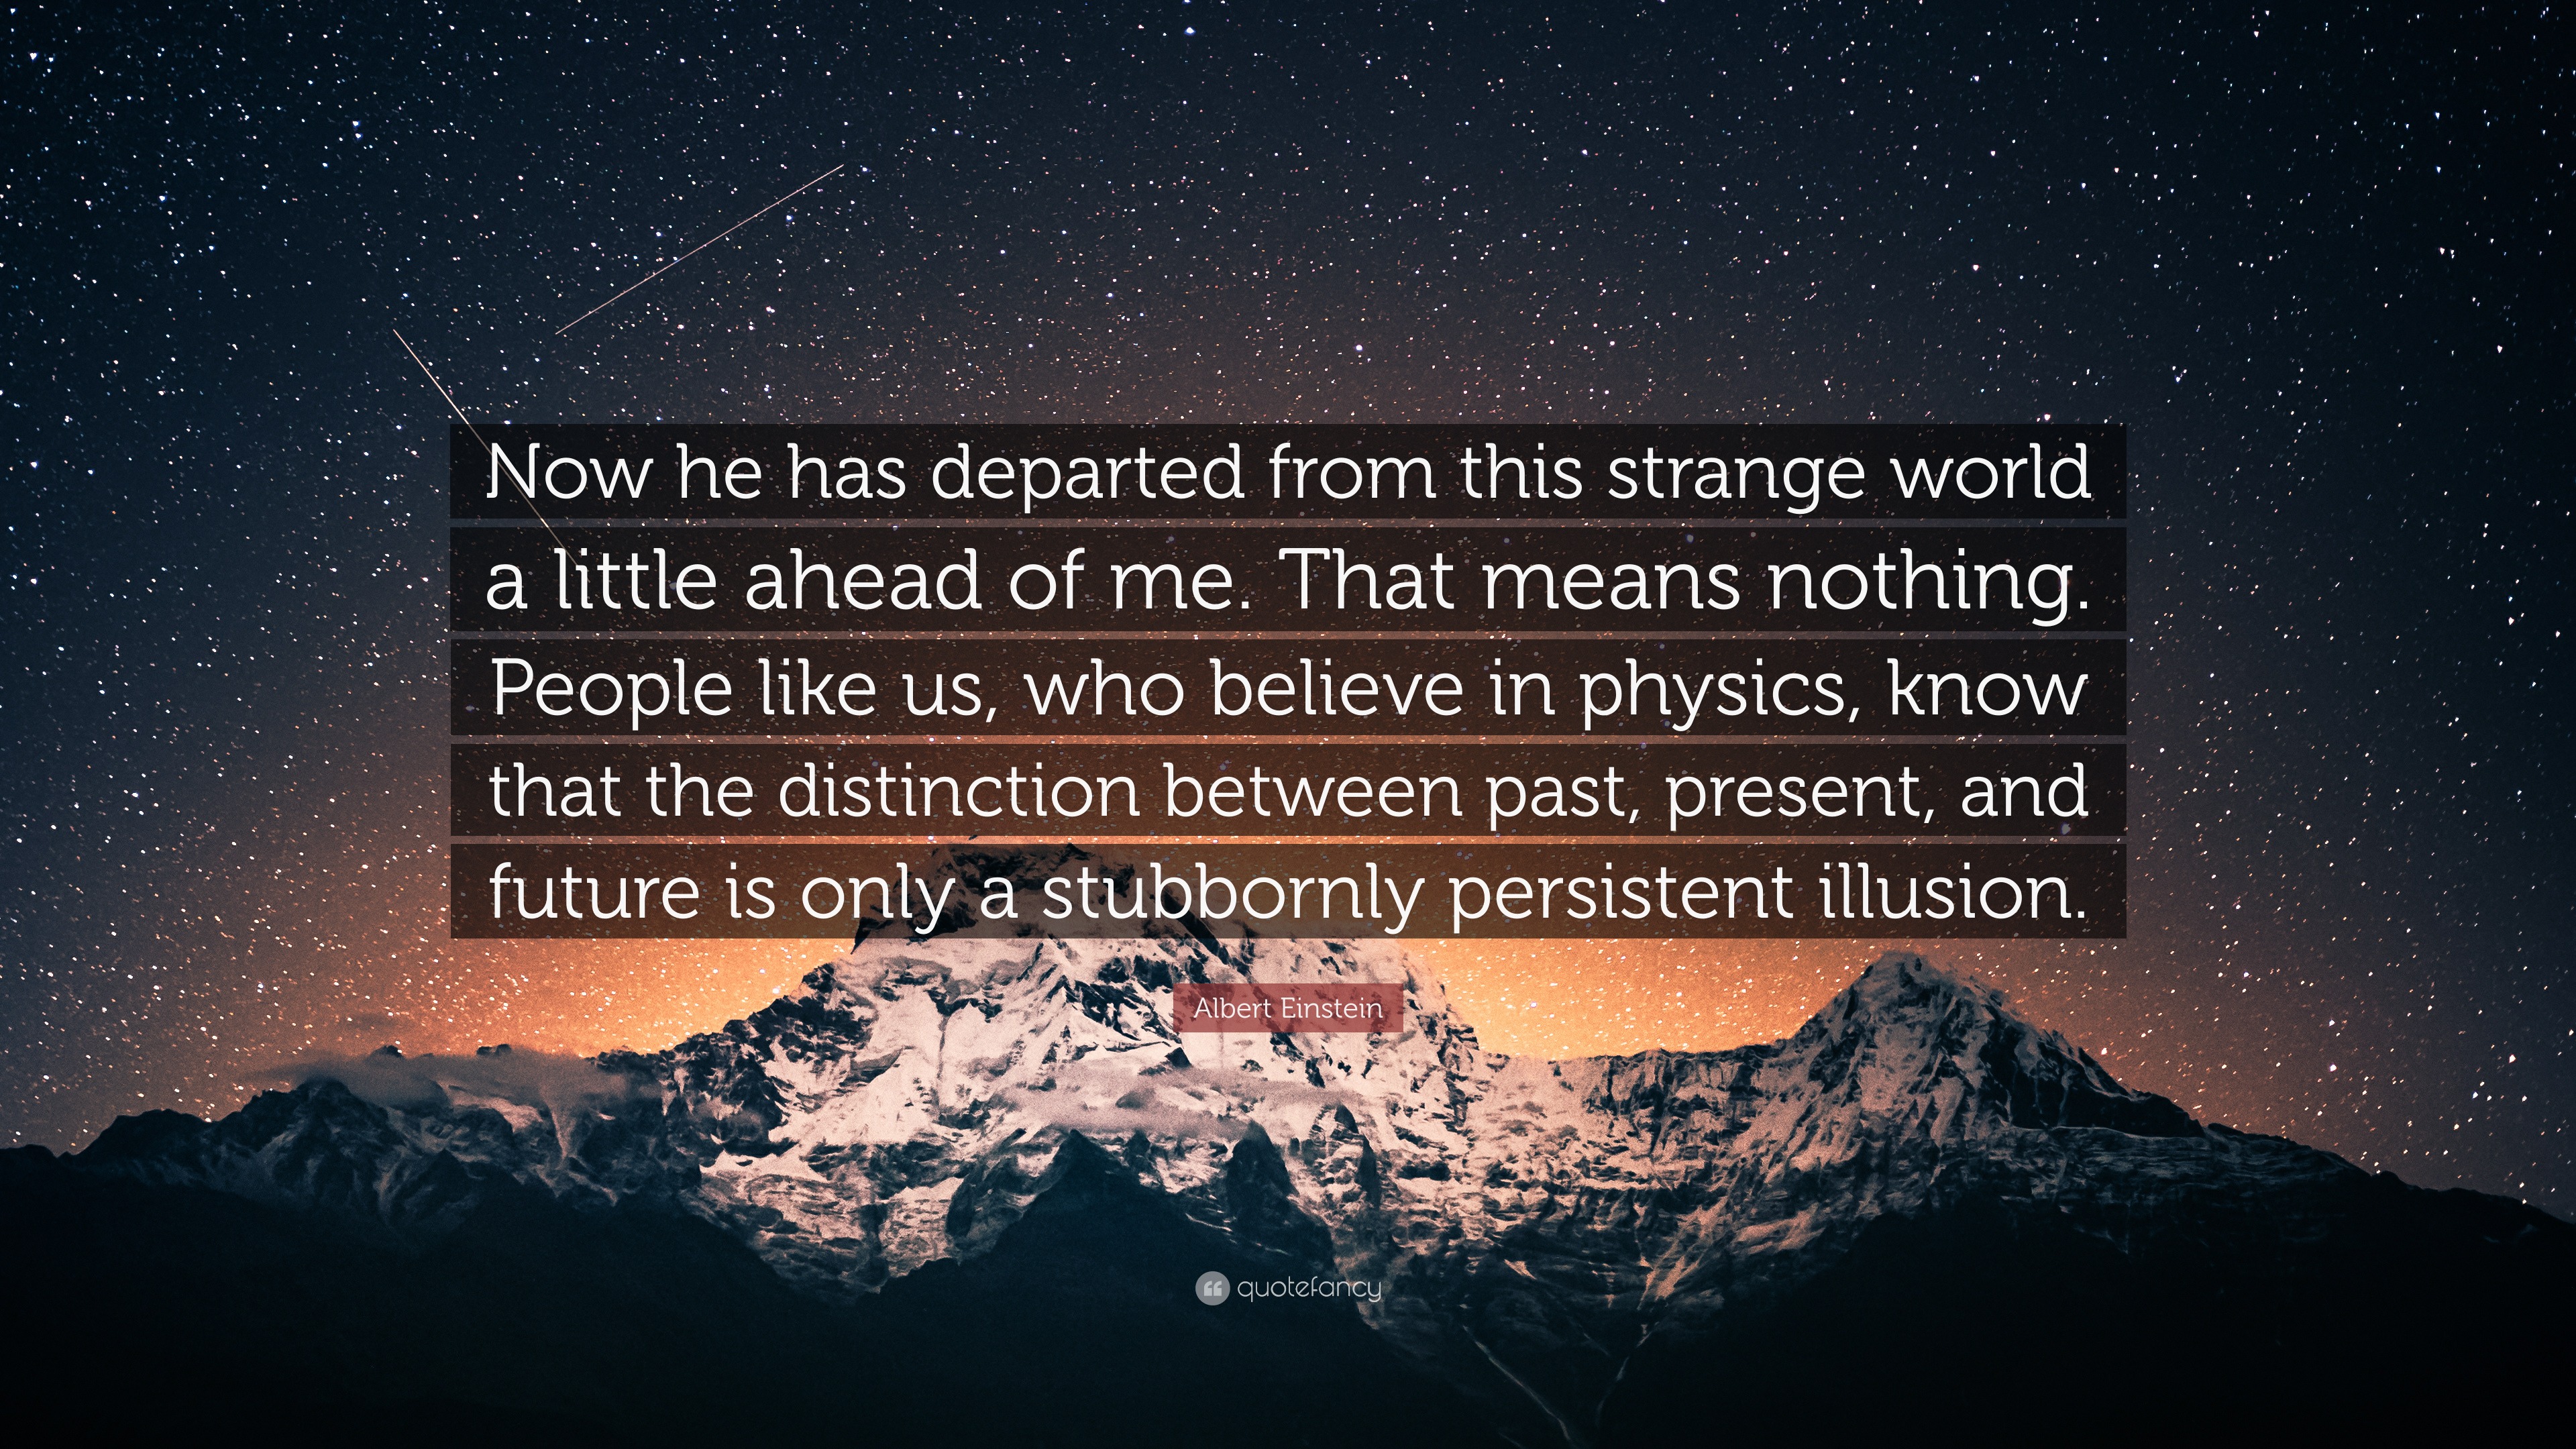 Albert Einstein Quote Now He Has Departed From This Strange World A Little Ahead Of Me That Means Nothing People Like Us Who Believe In Phy 9 Wallpapers Quotefancy